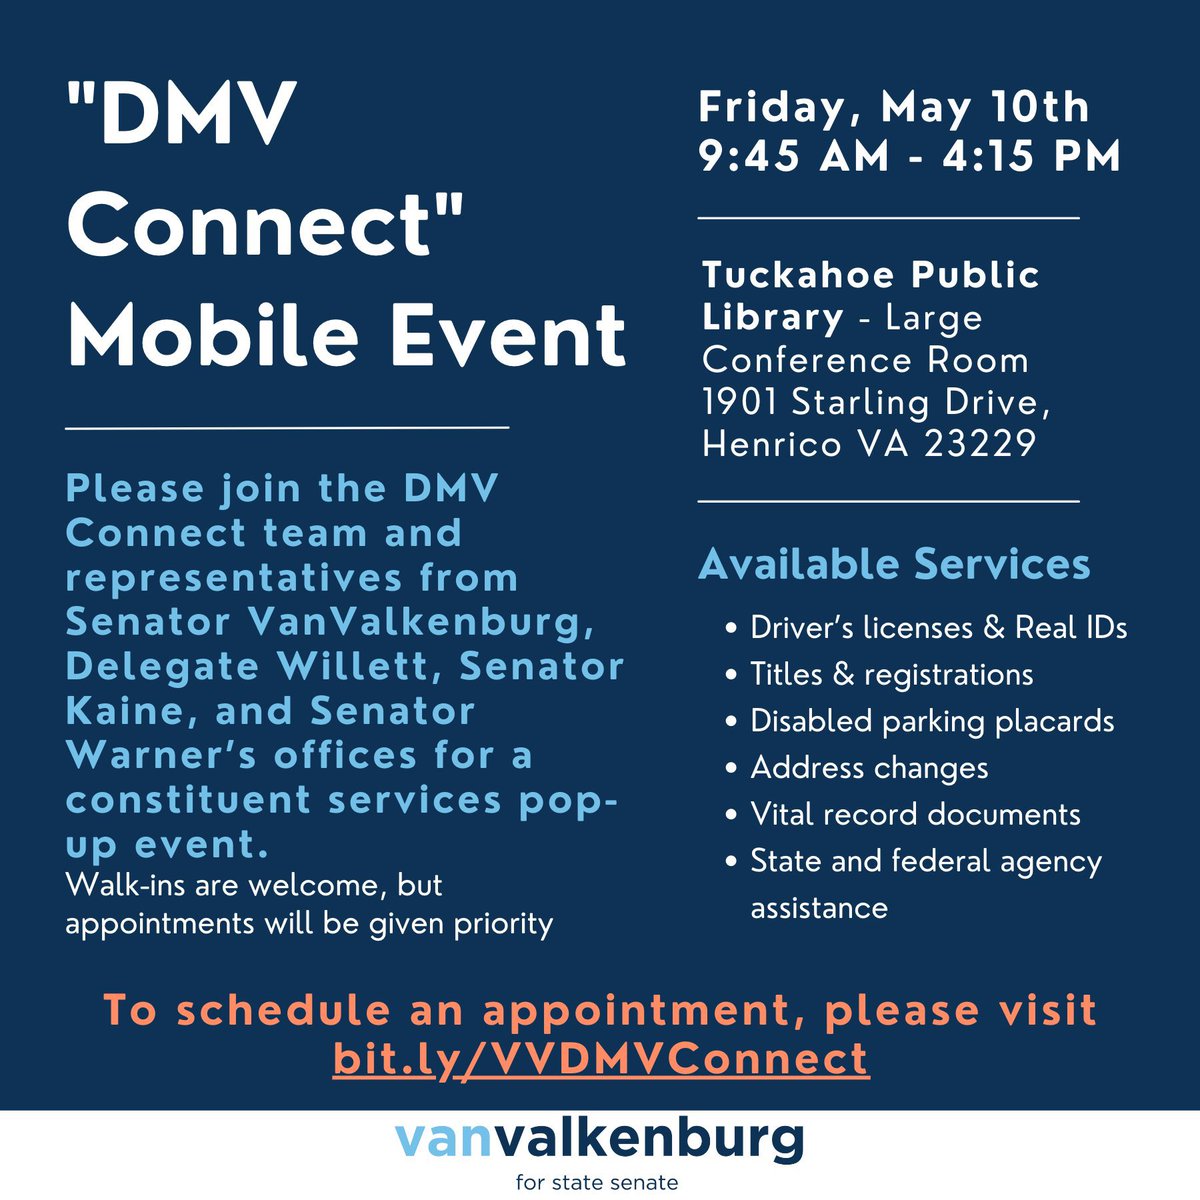 Join us this Friday, May 10th for a “DMV Connect” mobile event at the Tuckahoe Library. Representatives will be on hand from my office, @ScVanValkenburg, @SenTimKaine, and @MarkWarner’s offices to help constituents access services with DMV and other state and federal agencies.